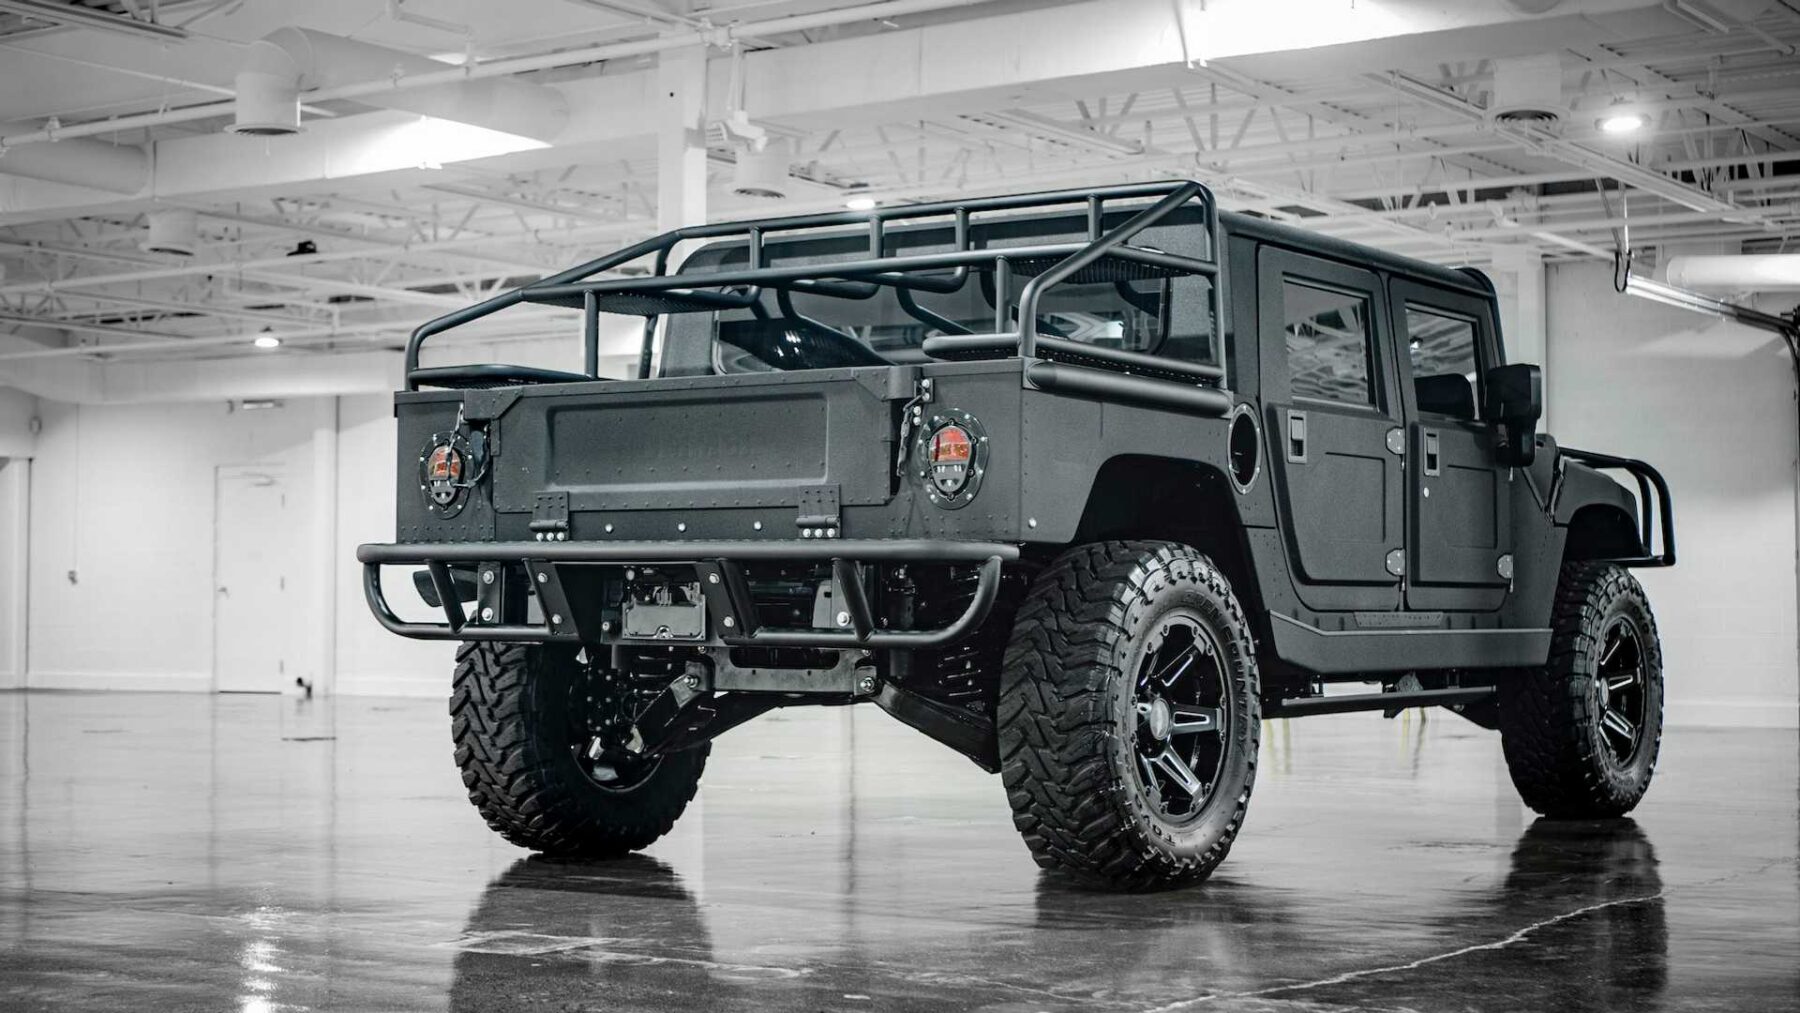 Not interested in the future Electric Hummer? You can have this H1 with 500 CV and 1,356 Nm of torque